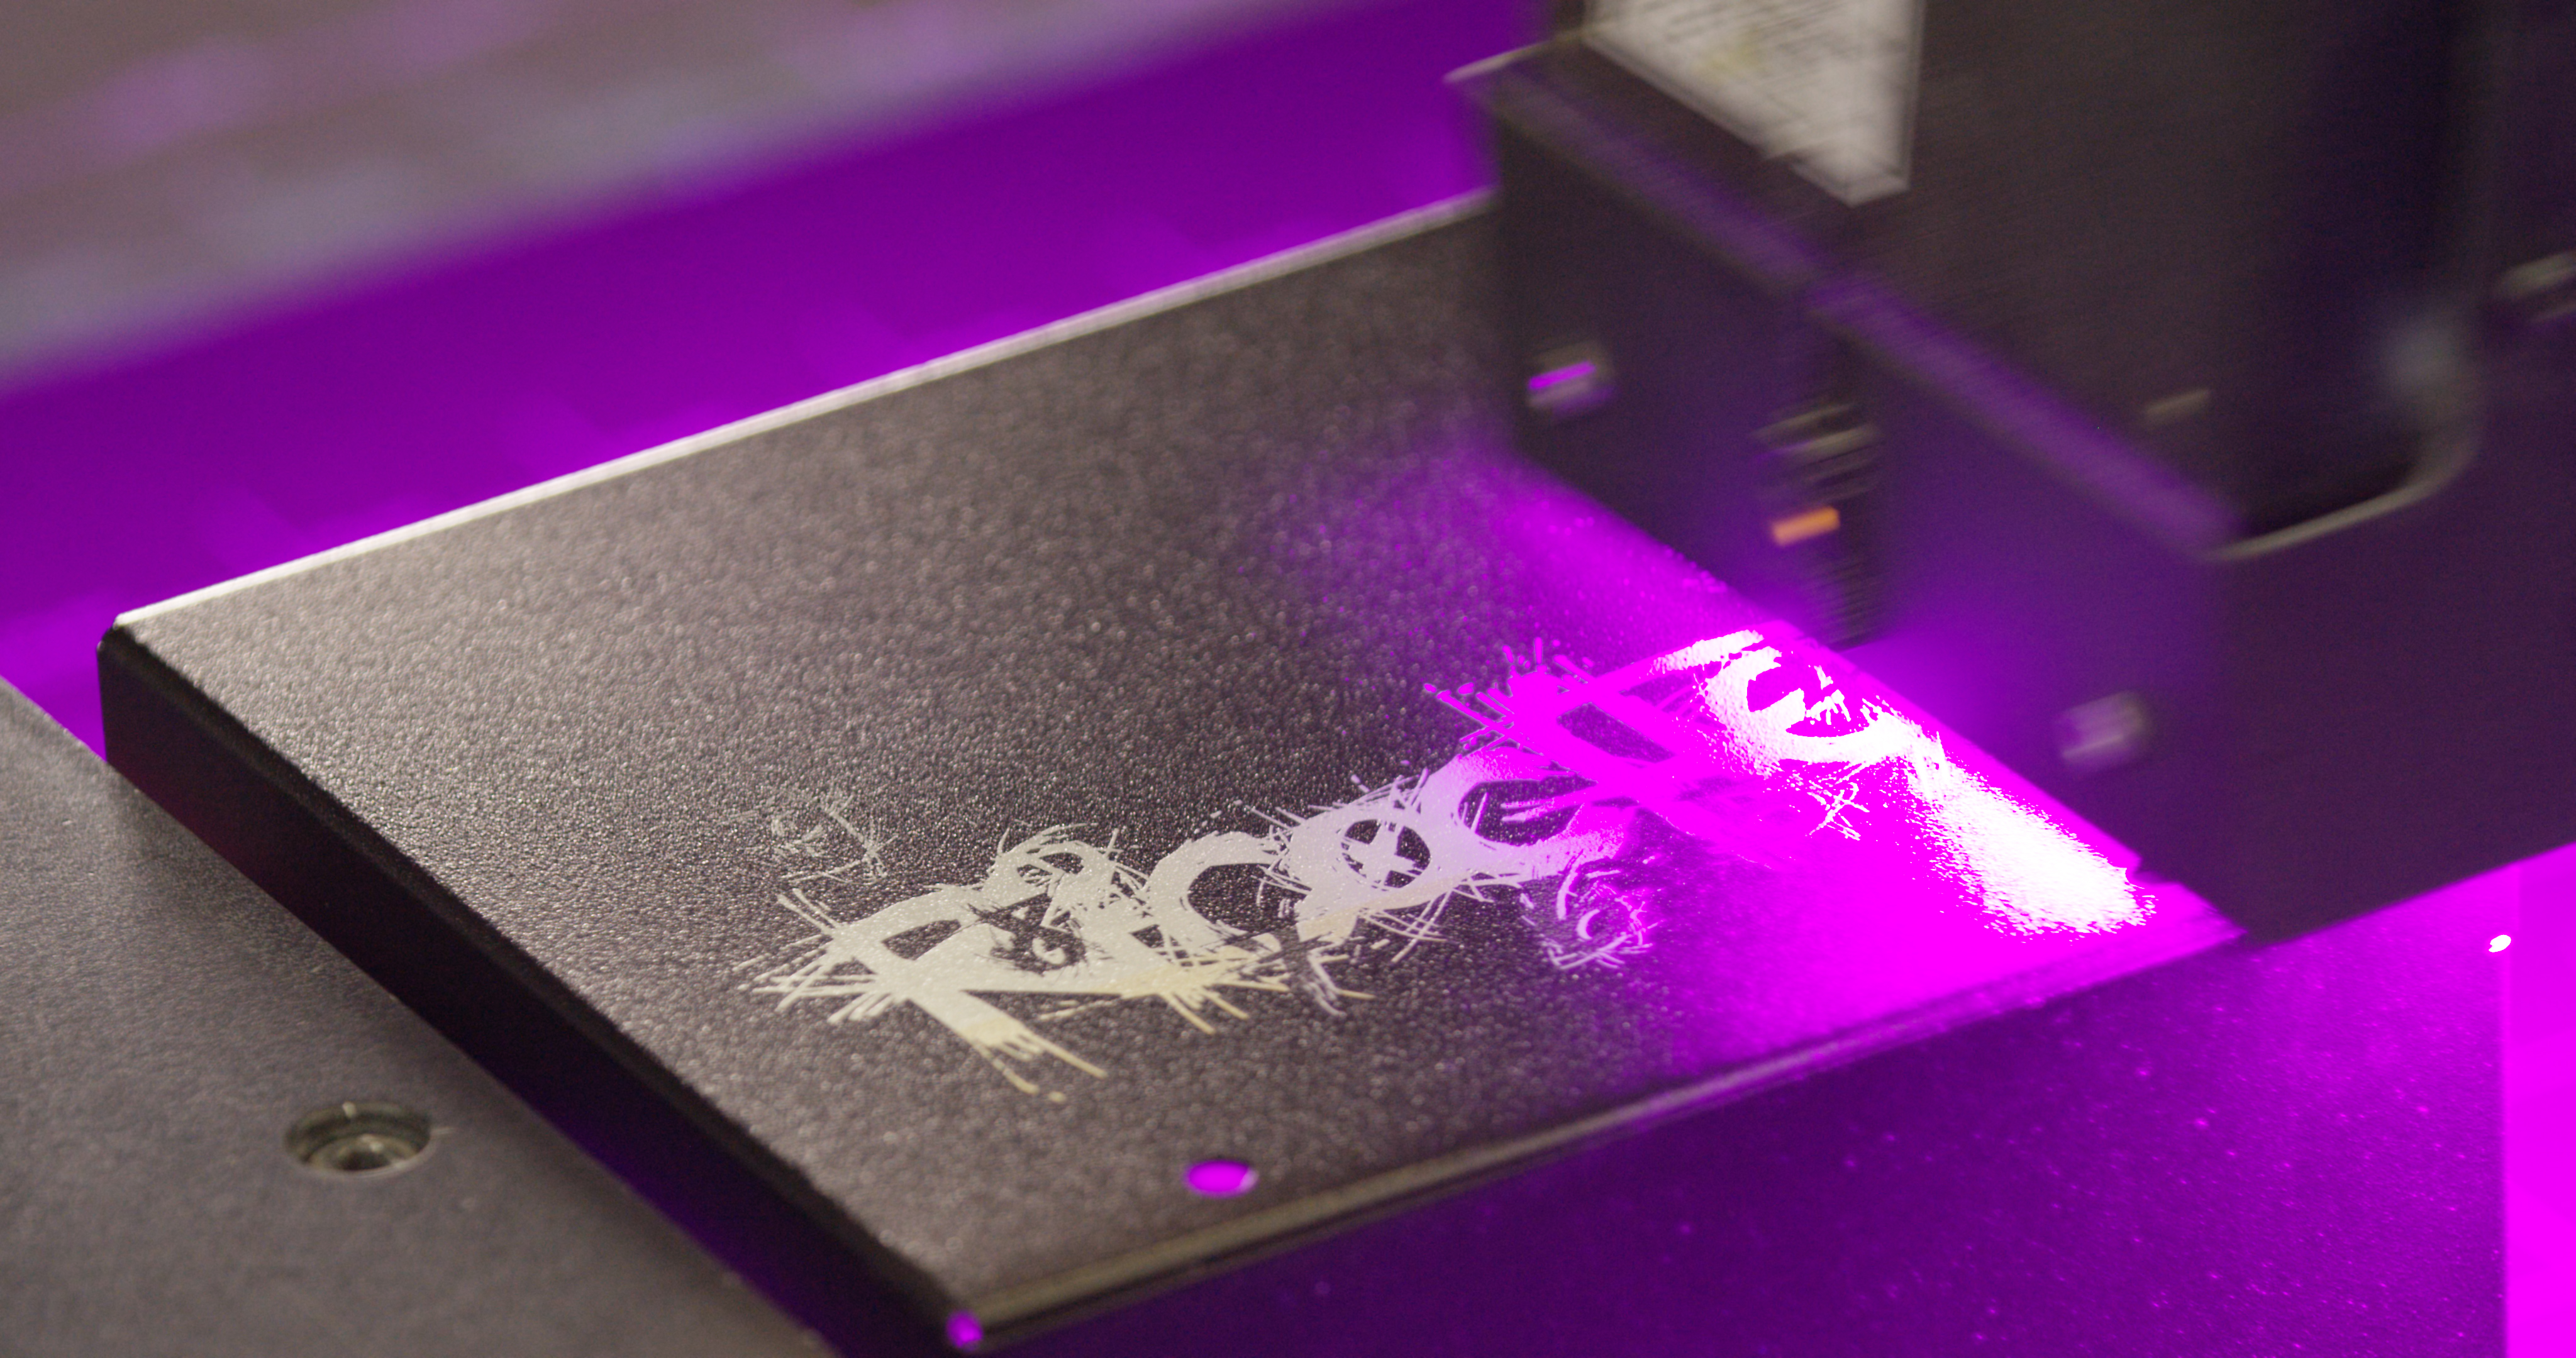 The UV printhead makes passes on the surface of the metal